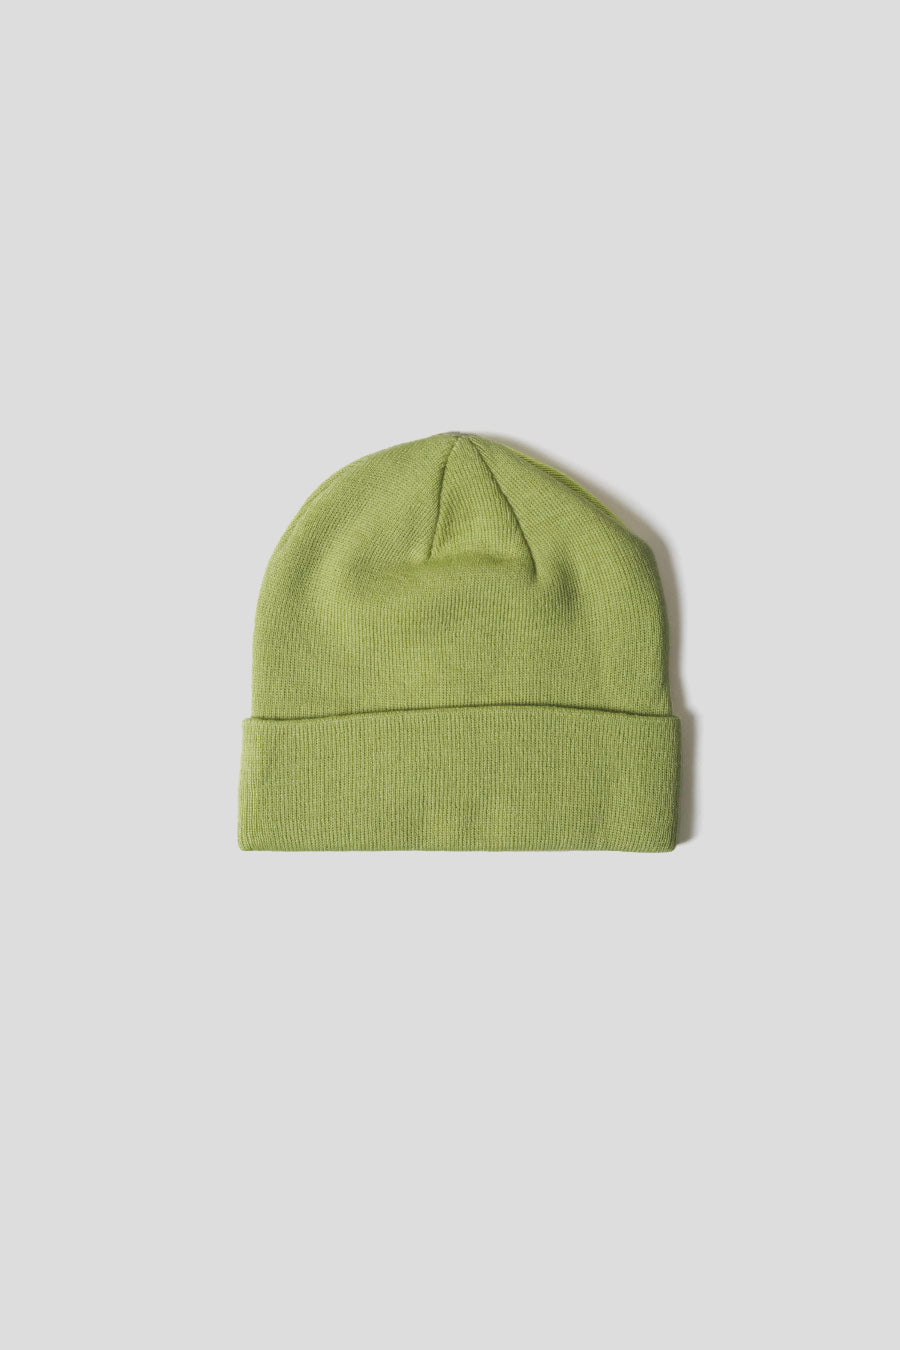 Dime - CLASSIC WOOL FOLD LIME HAT - LE LABO STORE